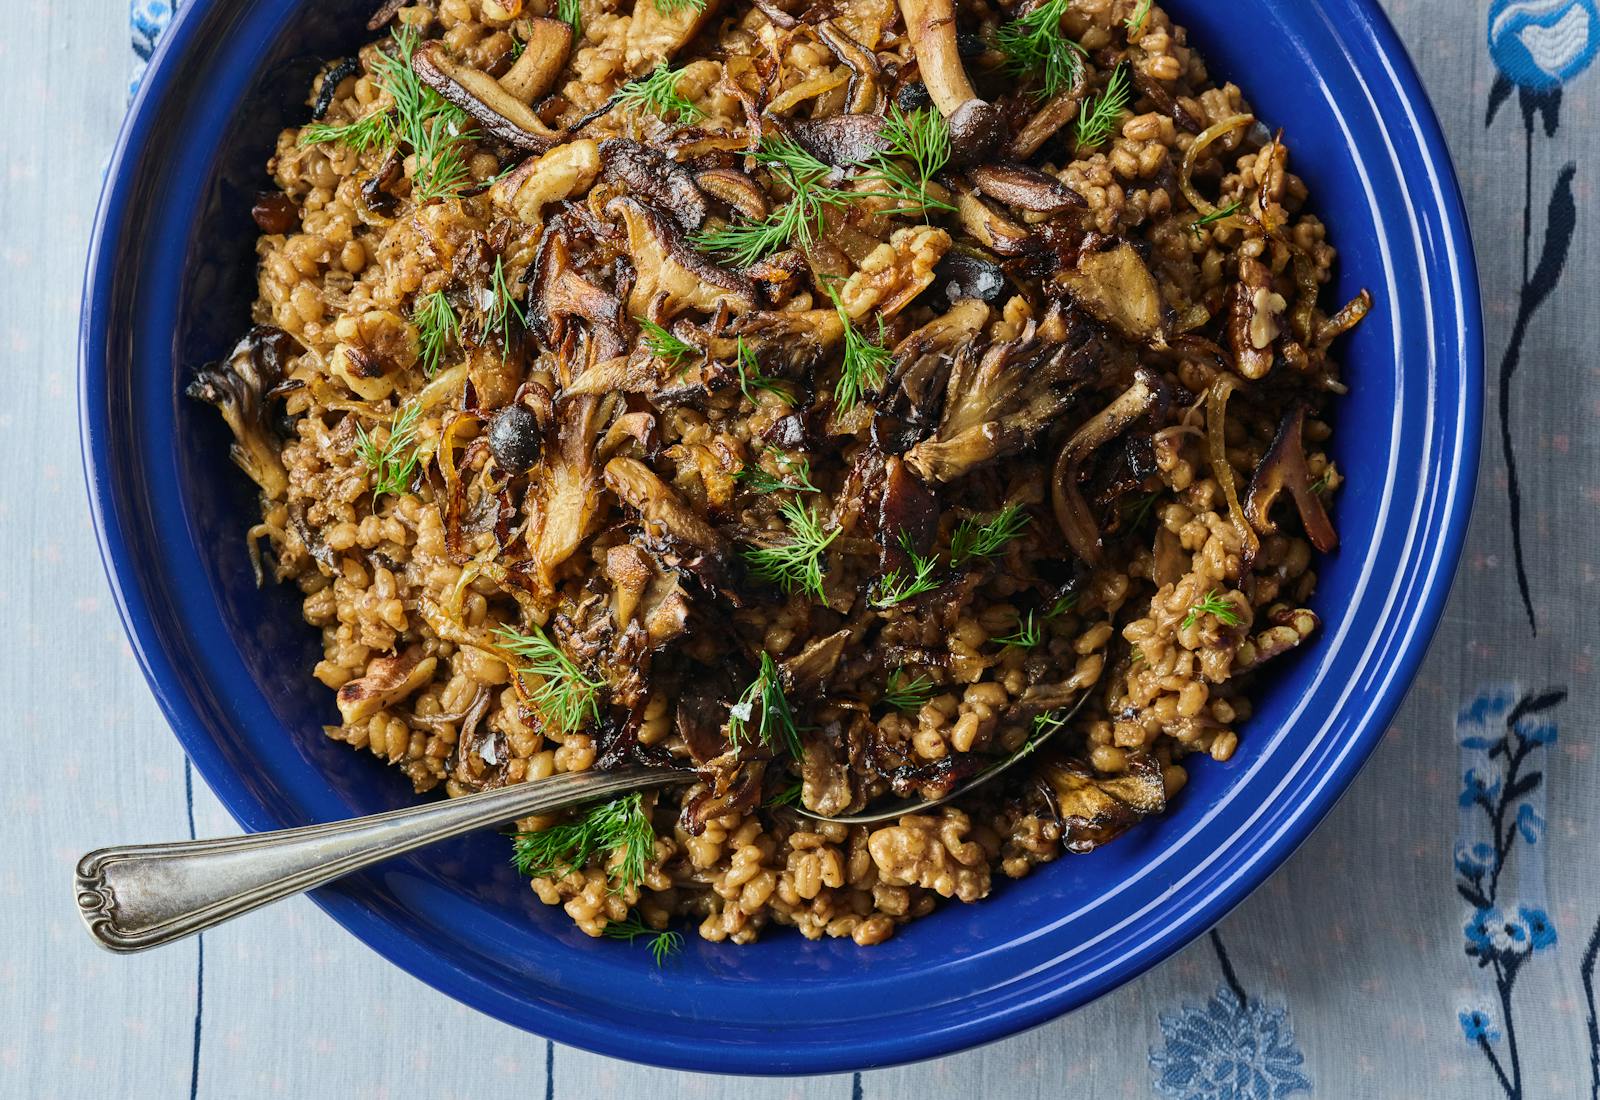 Large blue bowl filled with toasted barley pilaf, garnished with mushrooms and dill.